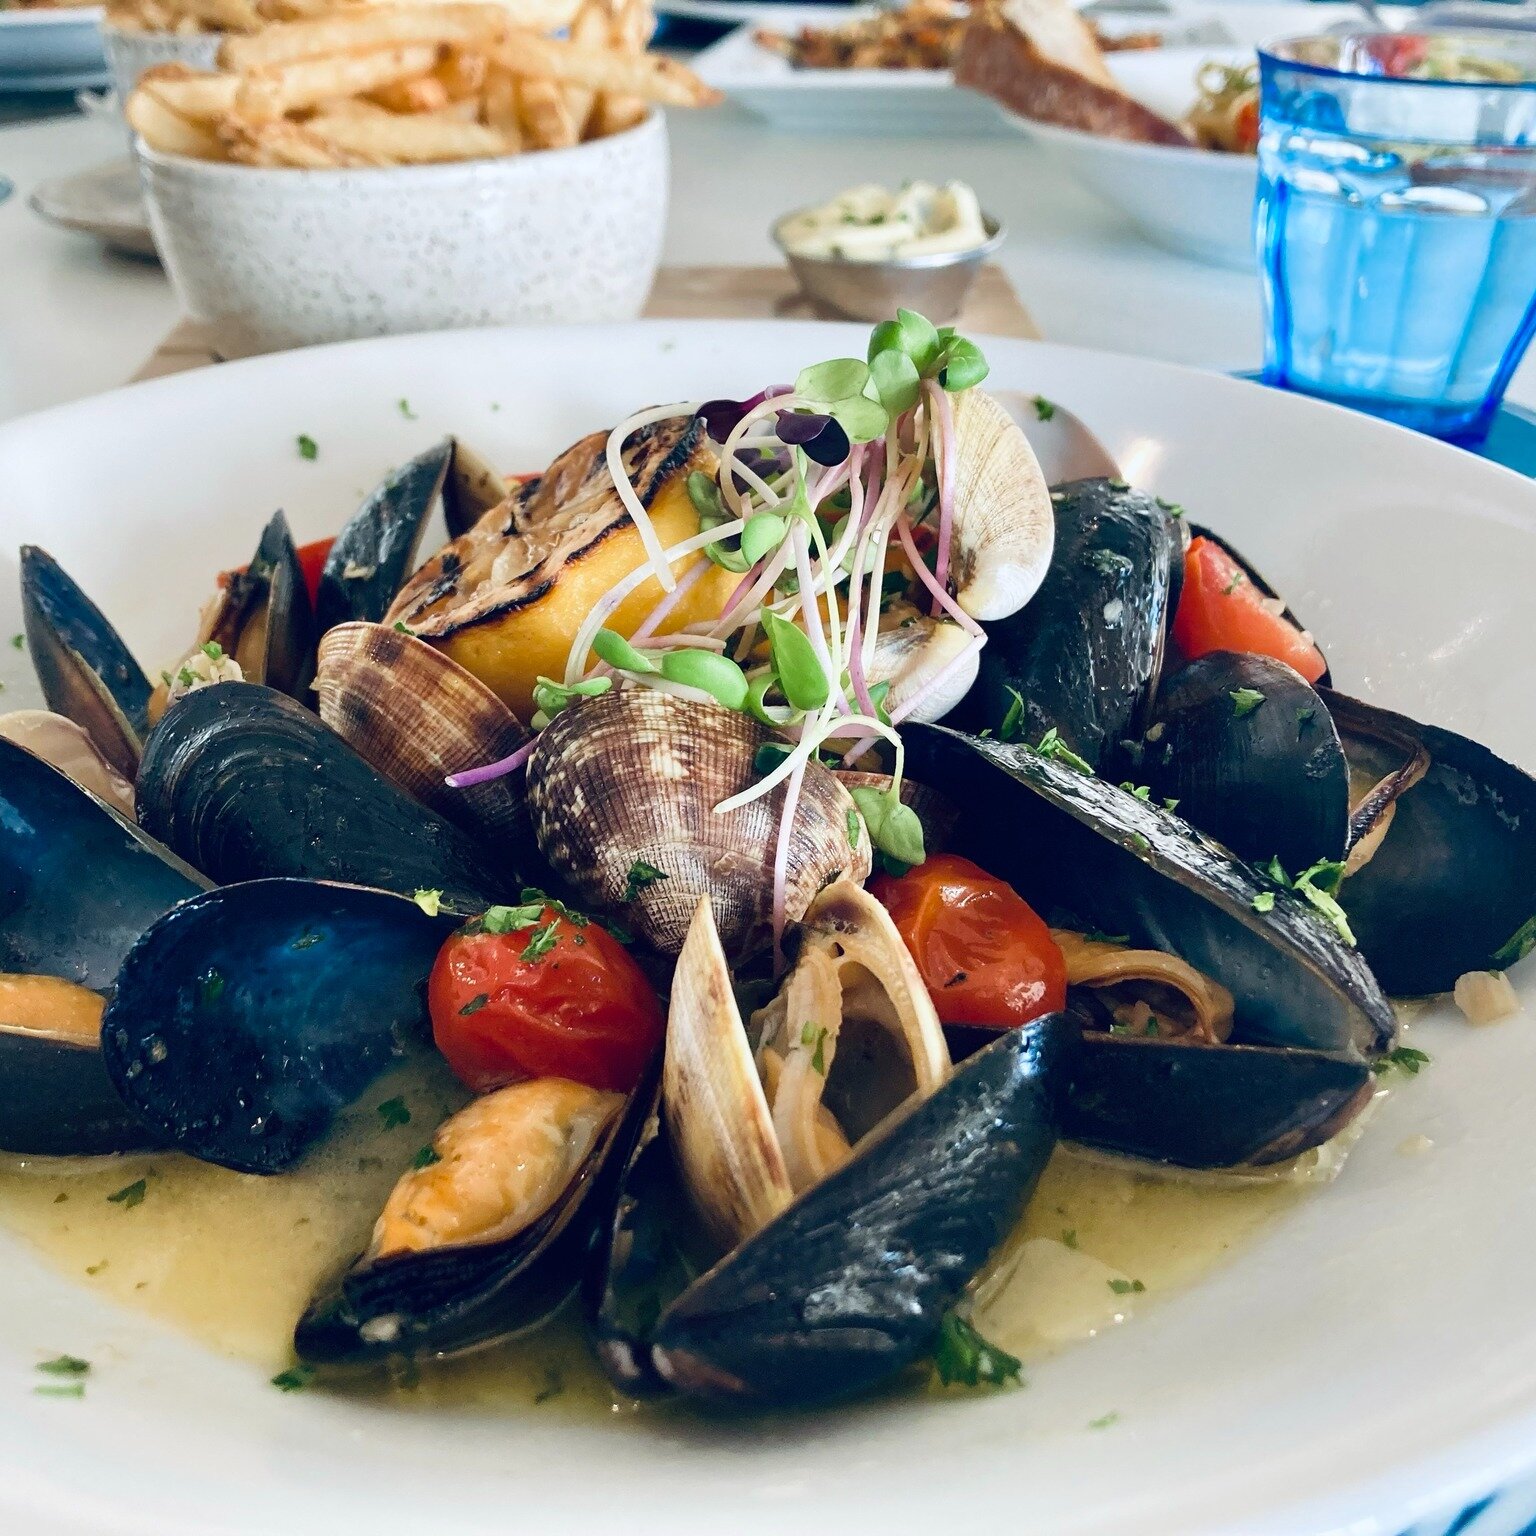 Our Mussel + Clam Hot Pot is the perfect appetizer for sharing! It's served with our crispy, mouth-watering fries and aioli.
.
We also have our Seasider Sizzler Plates available tonight. Chicken, beef or prawns served with rice and veggies for only $